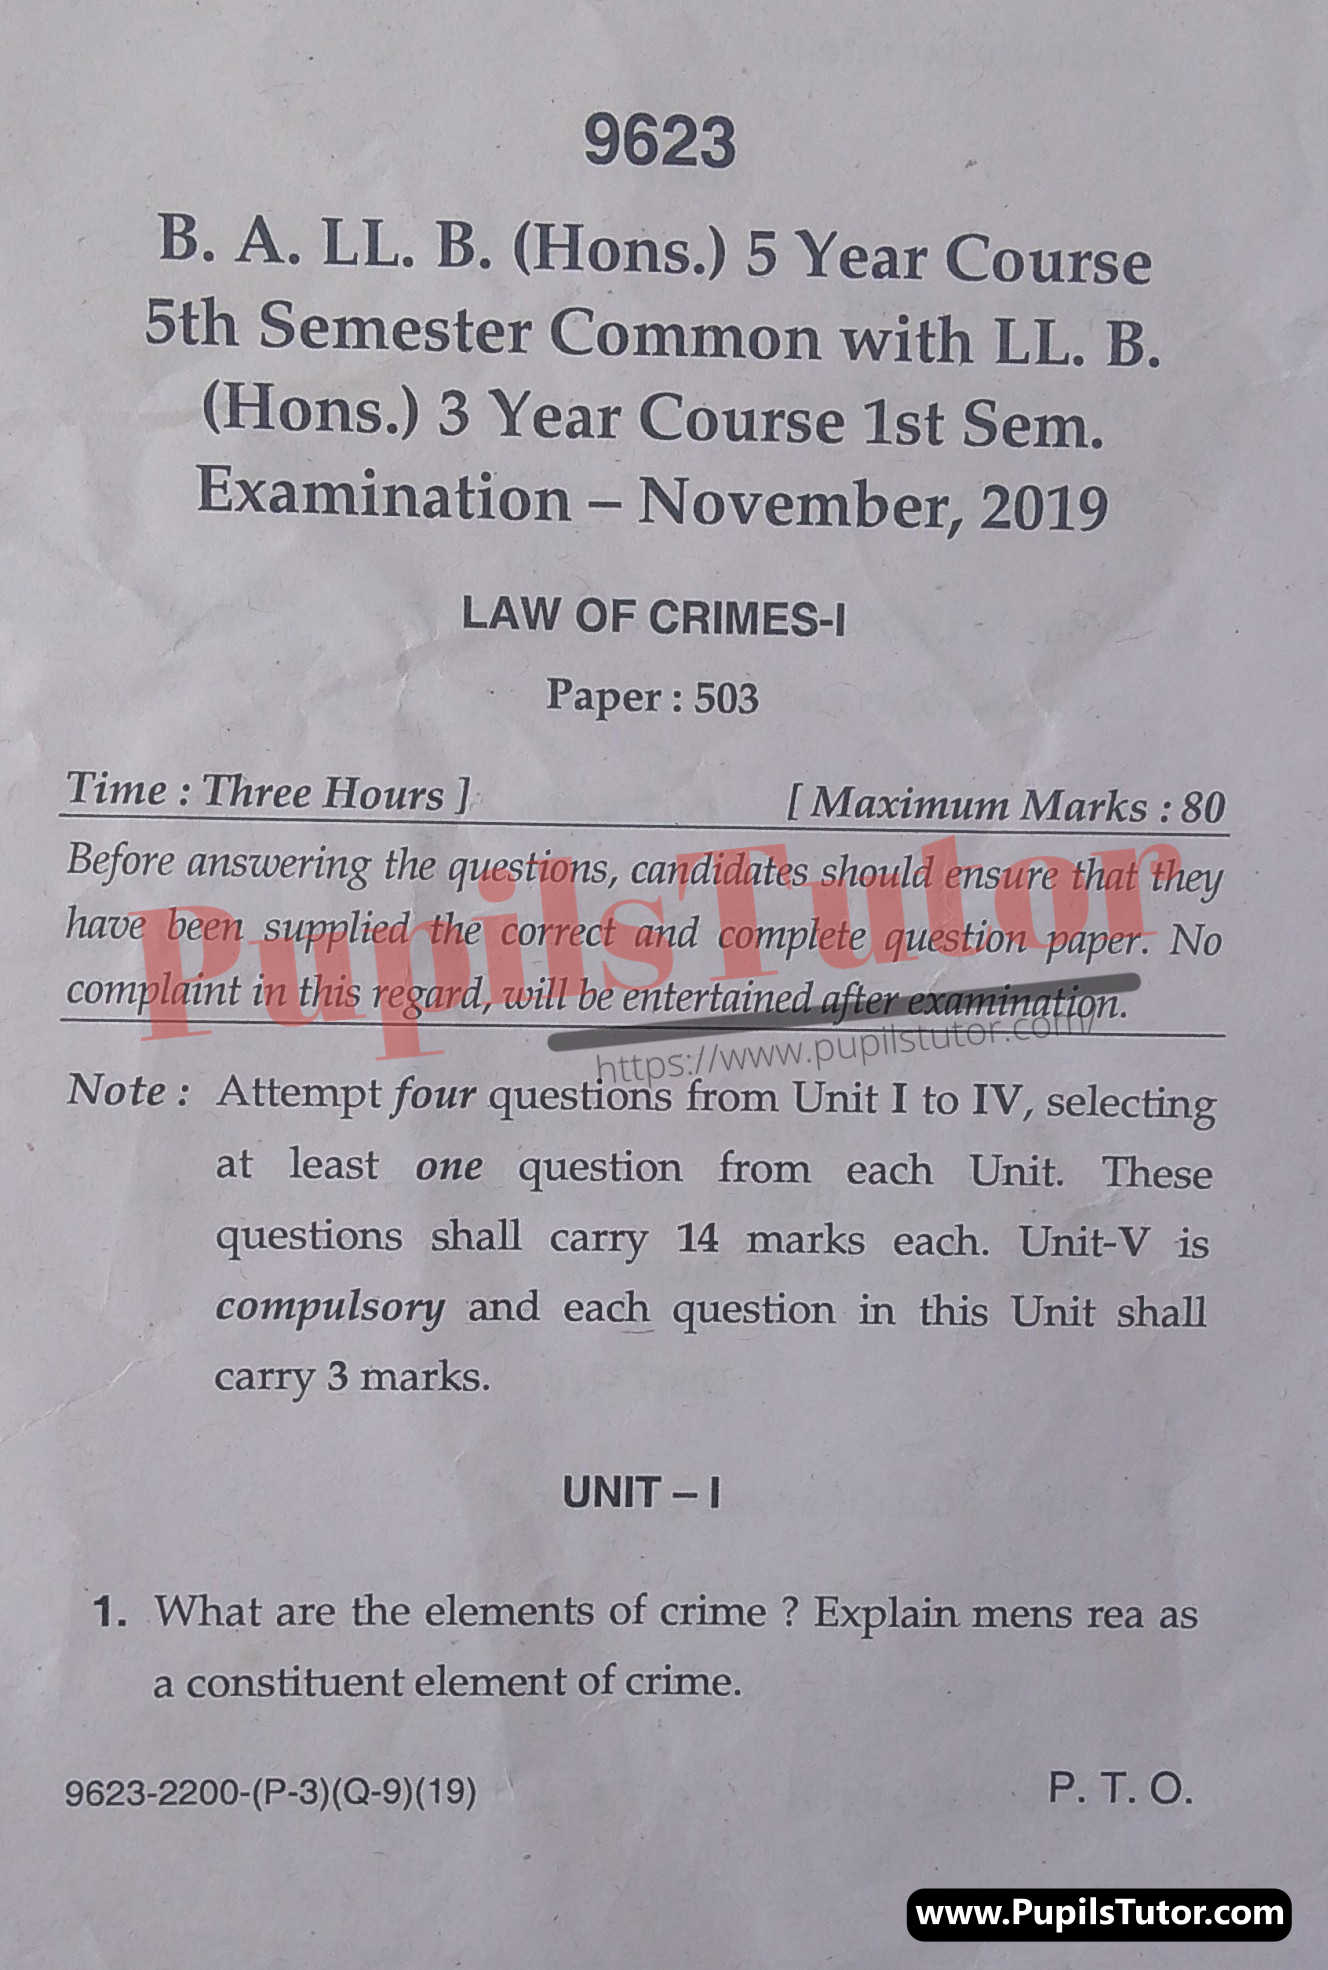 MDU (Maharshi Dayanand University, Rohtak Haryana) BA LLB Regular Exam Fifth Semester Previous Year Law Of Crimes Question Paper For November, 2019 Exam (Question Paper Page 1) - pupilstutor.com